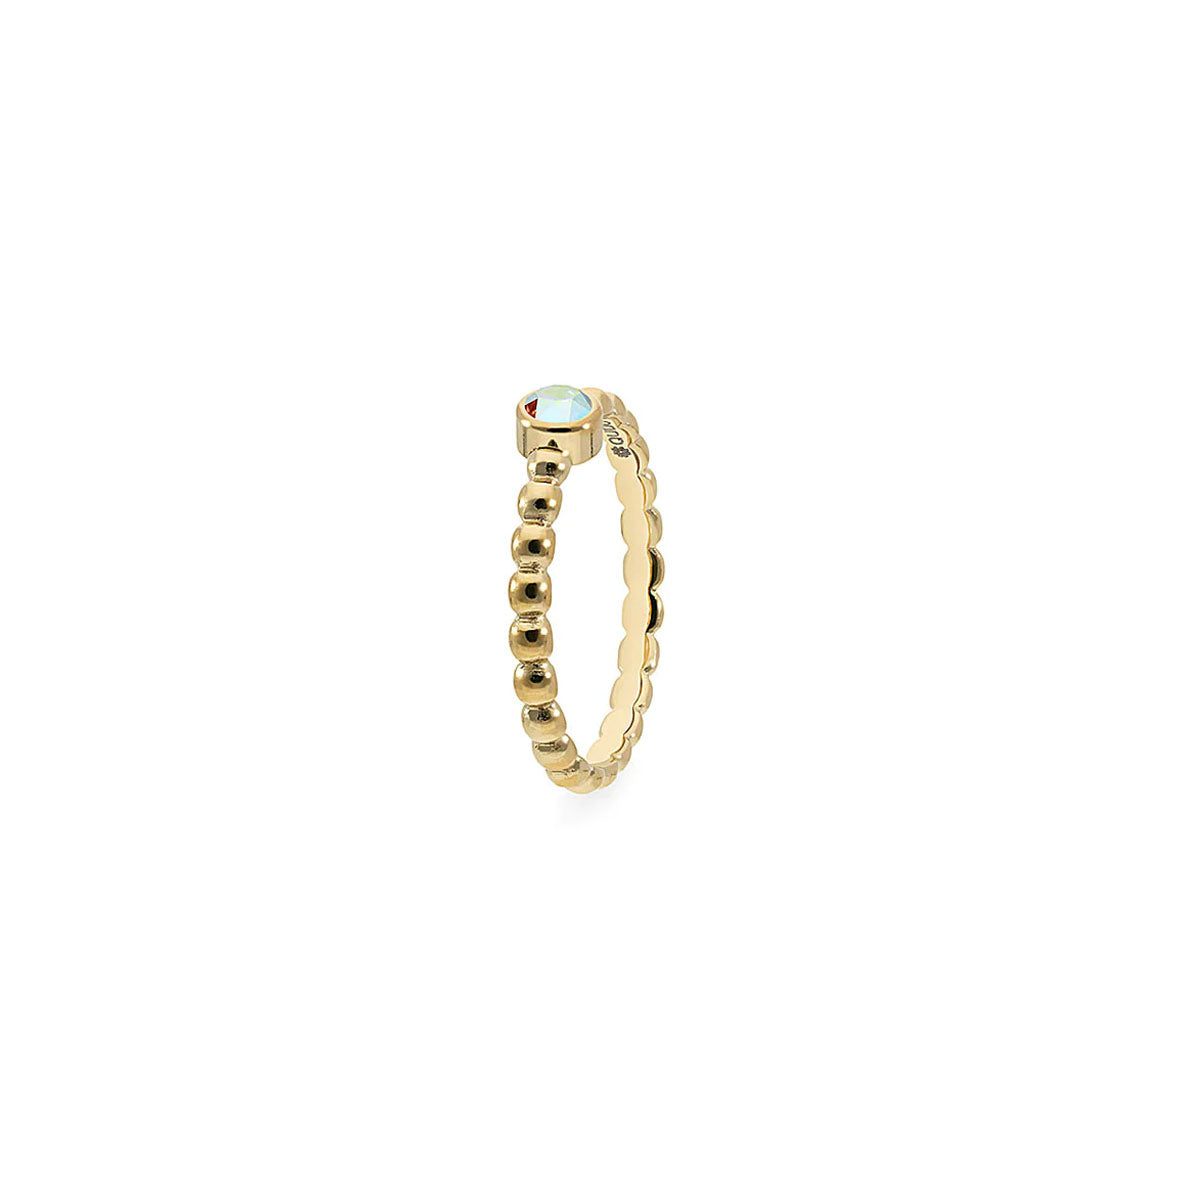 Matino Deluxe Ring in Gold - Aurora